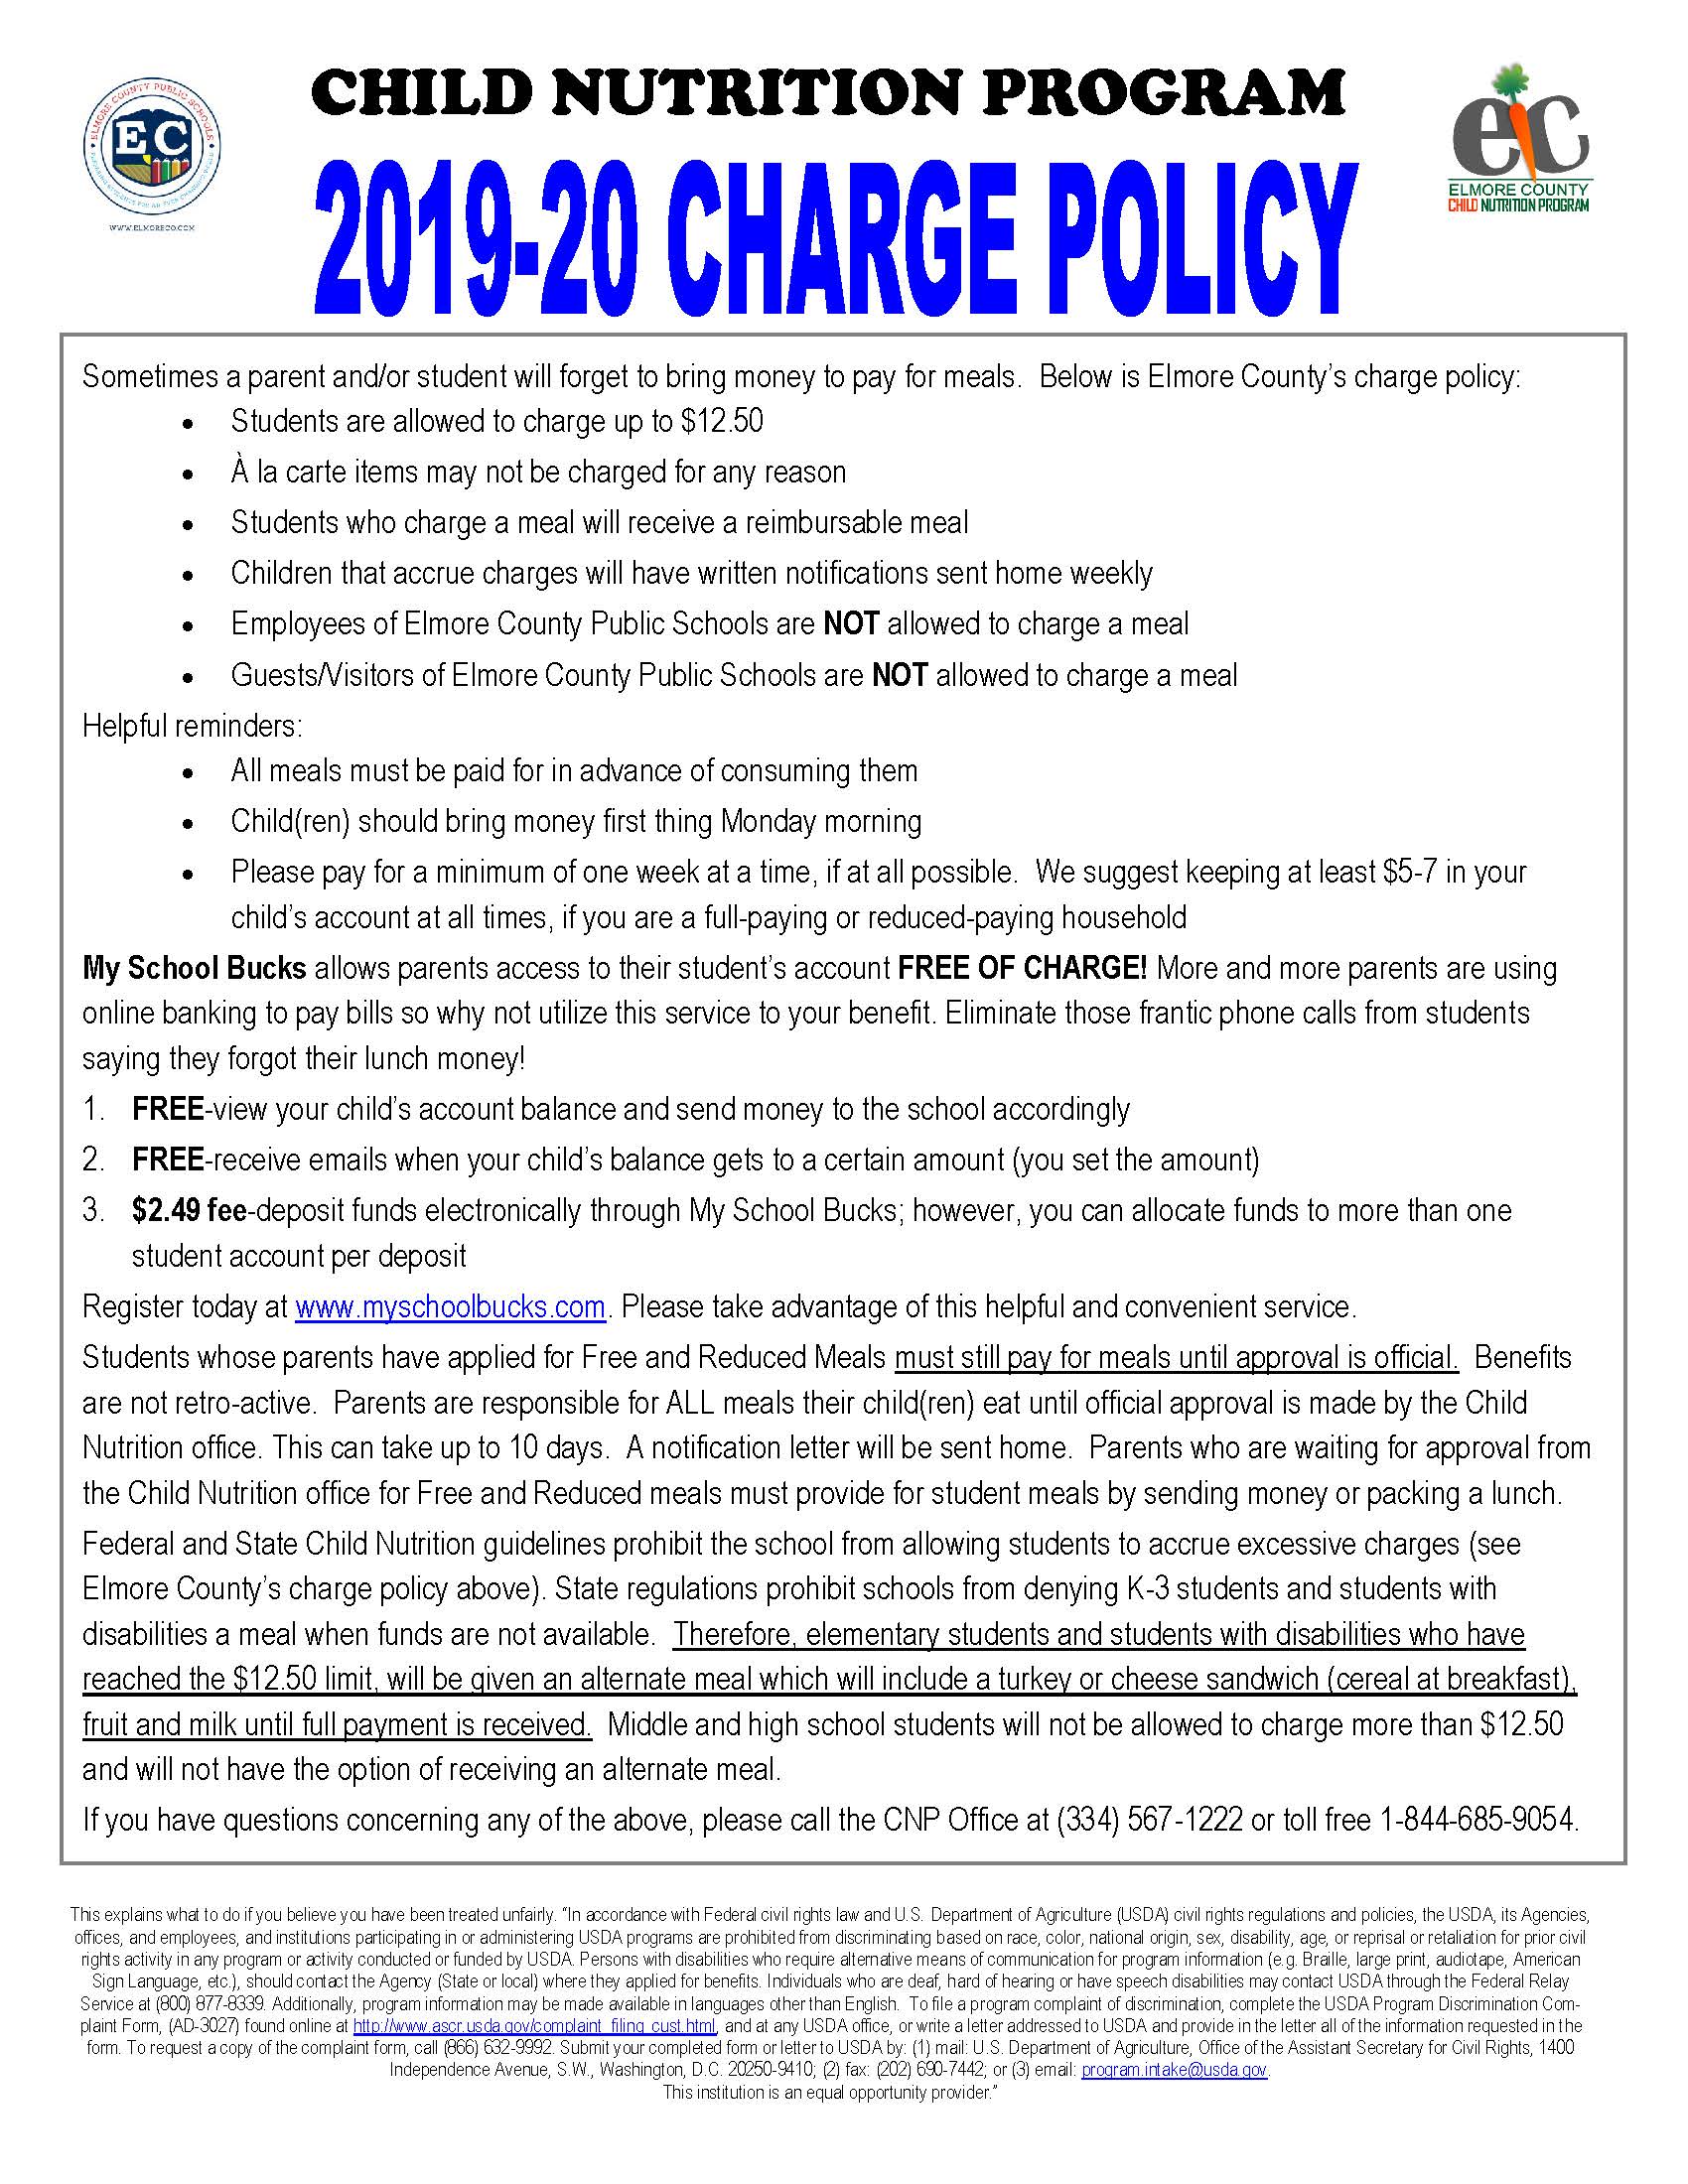 CNP Charge Policy 2019-20